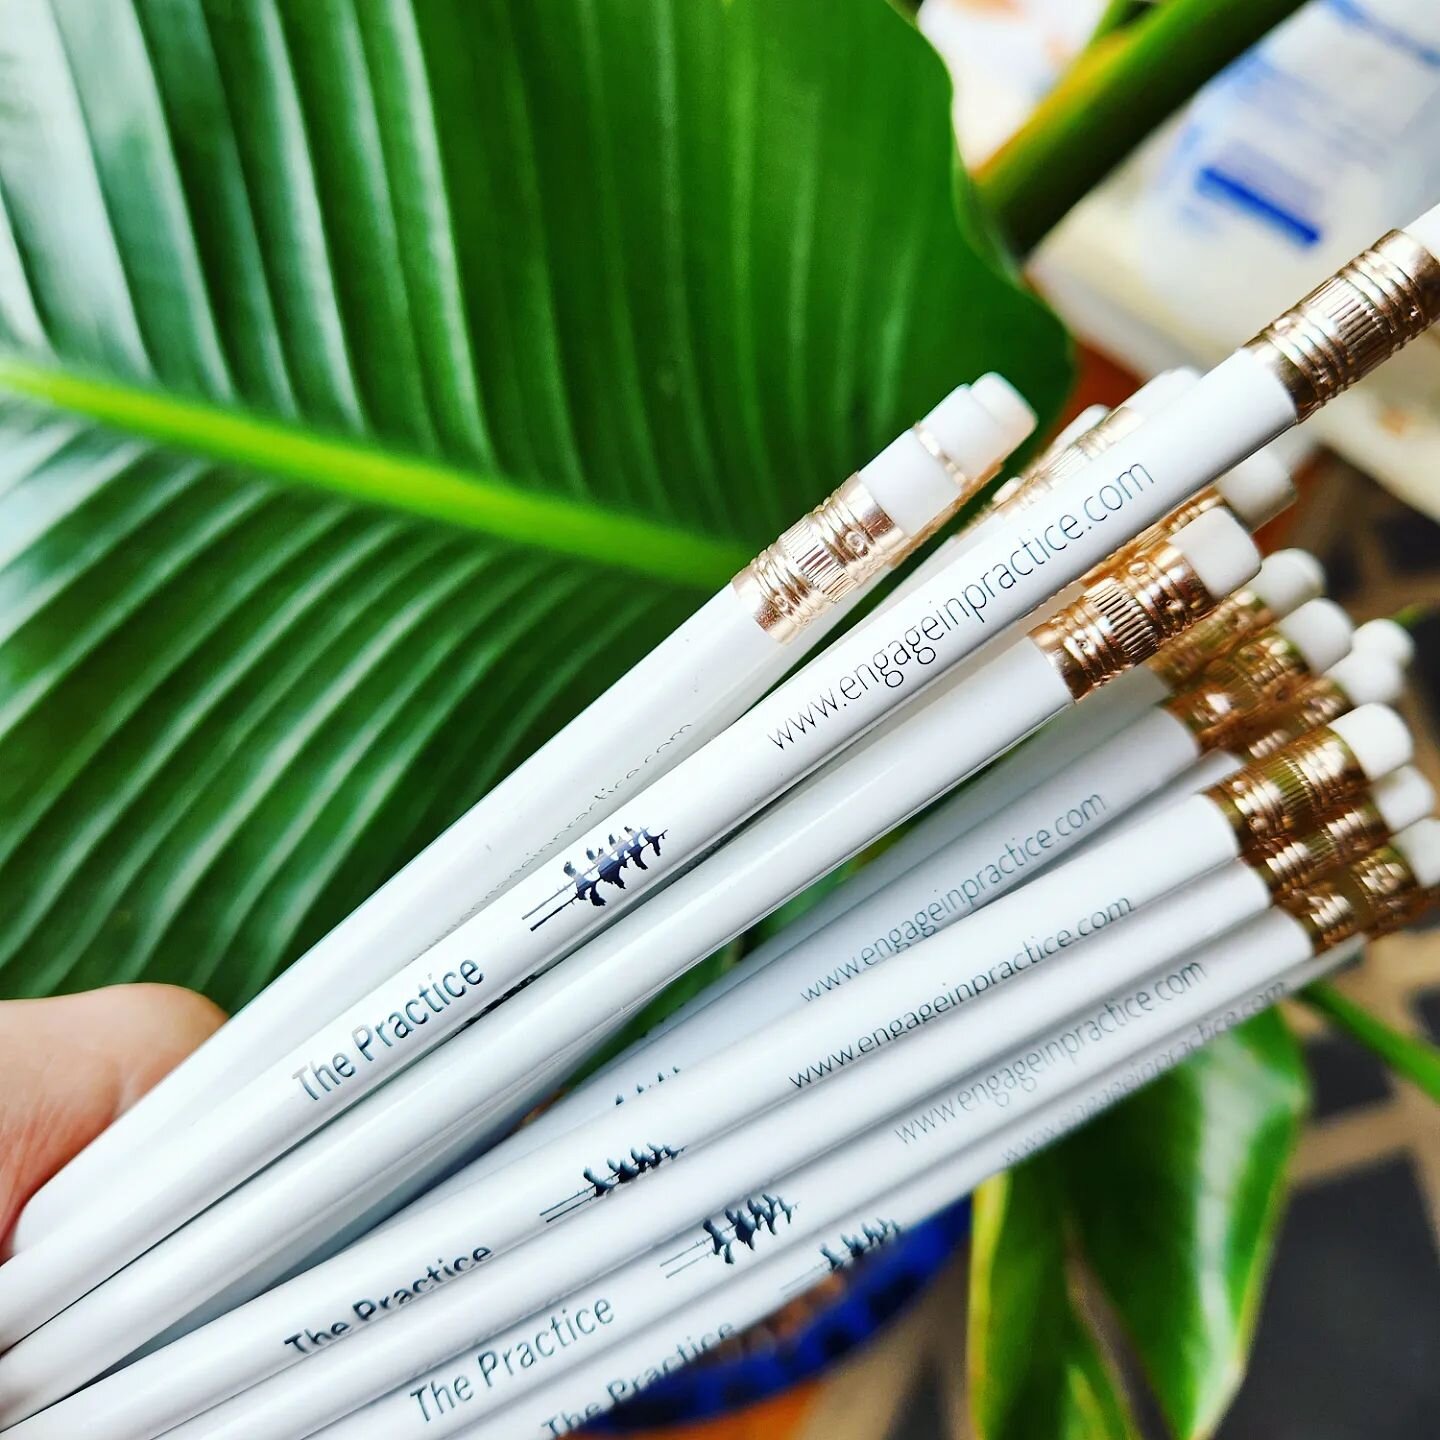 merch means it's official! have you ever wondered what 500 pencils looks like?? scroll through for the answer 👀➡️

rather than invest in paper business cards&ndash;which either get tossed or stuffed in someone's desk drawer or wallet&ndash;The Pract